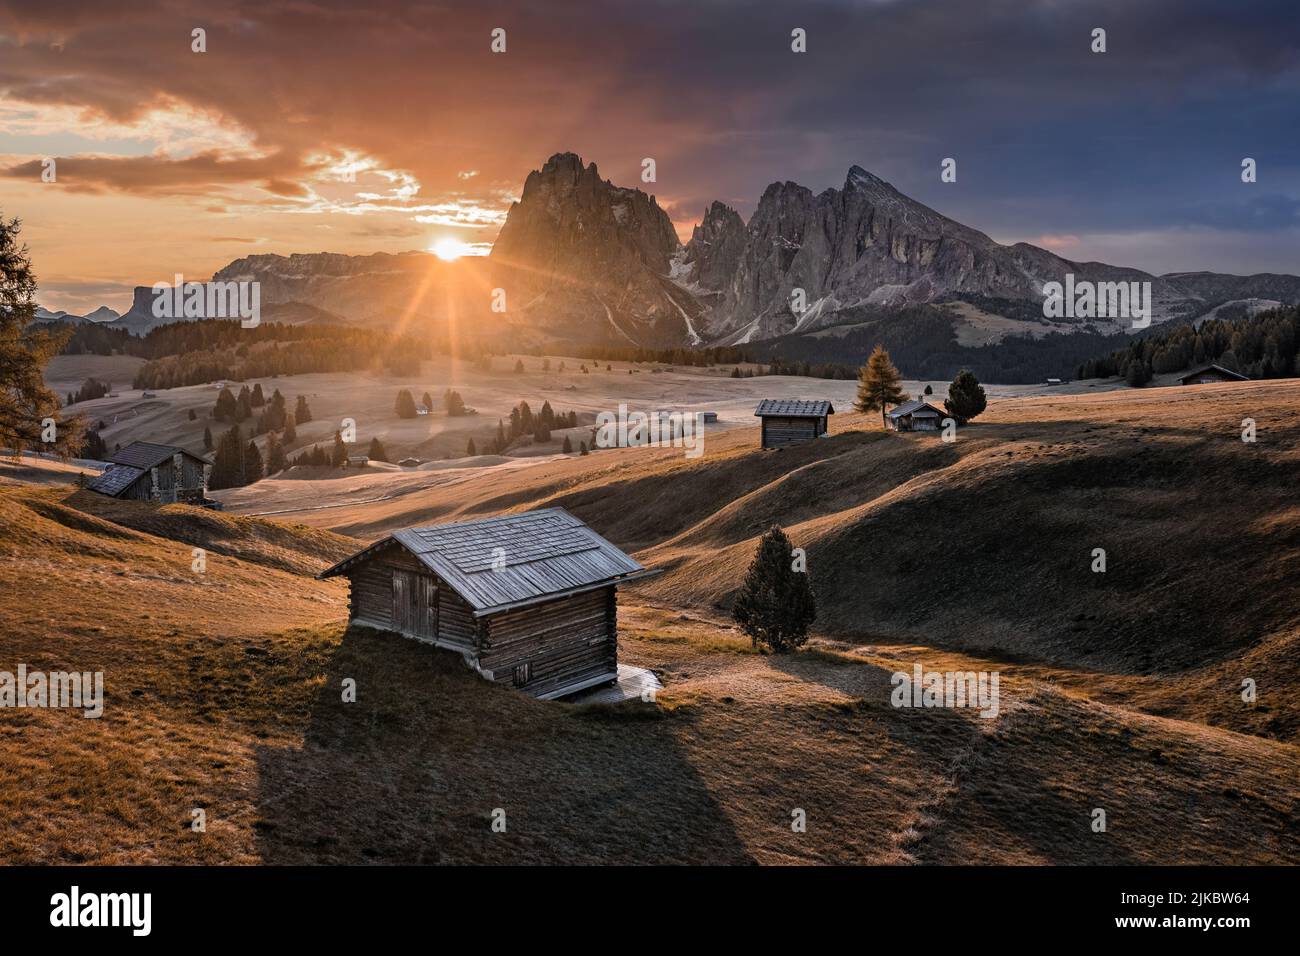 Alpe di Siusi, Italy - Beautiful autumn sunrise with wooden chalets at Seiser Alm, a Dolomite plateau in South Tyrol province in the Dolomites mountai Stock Photo